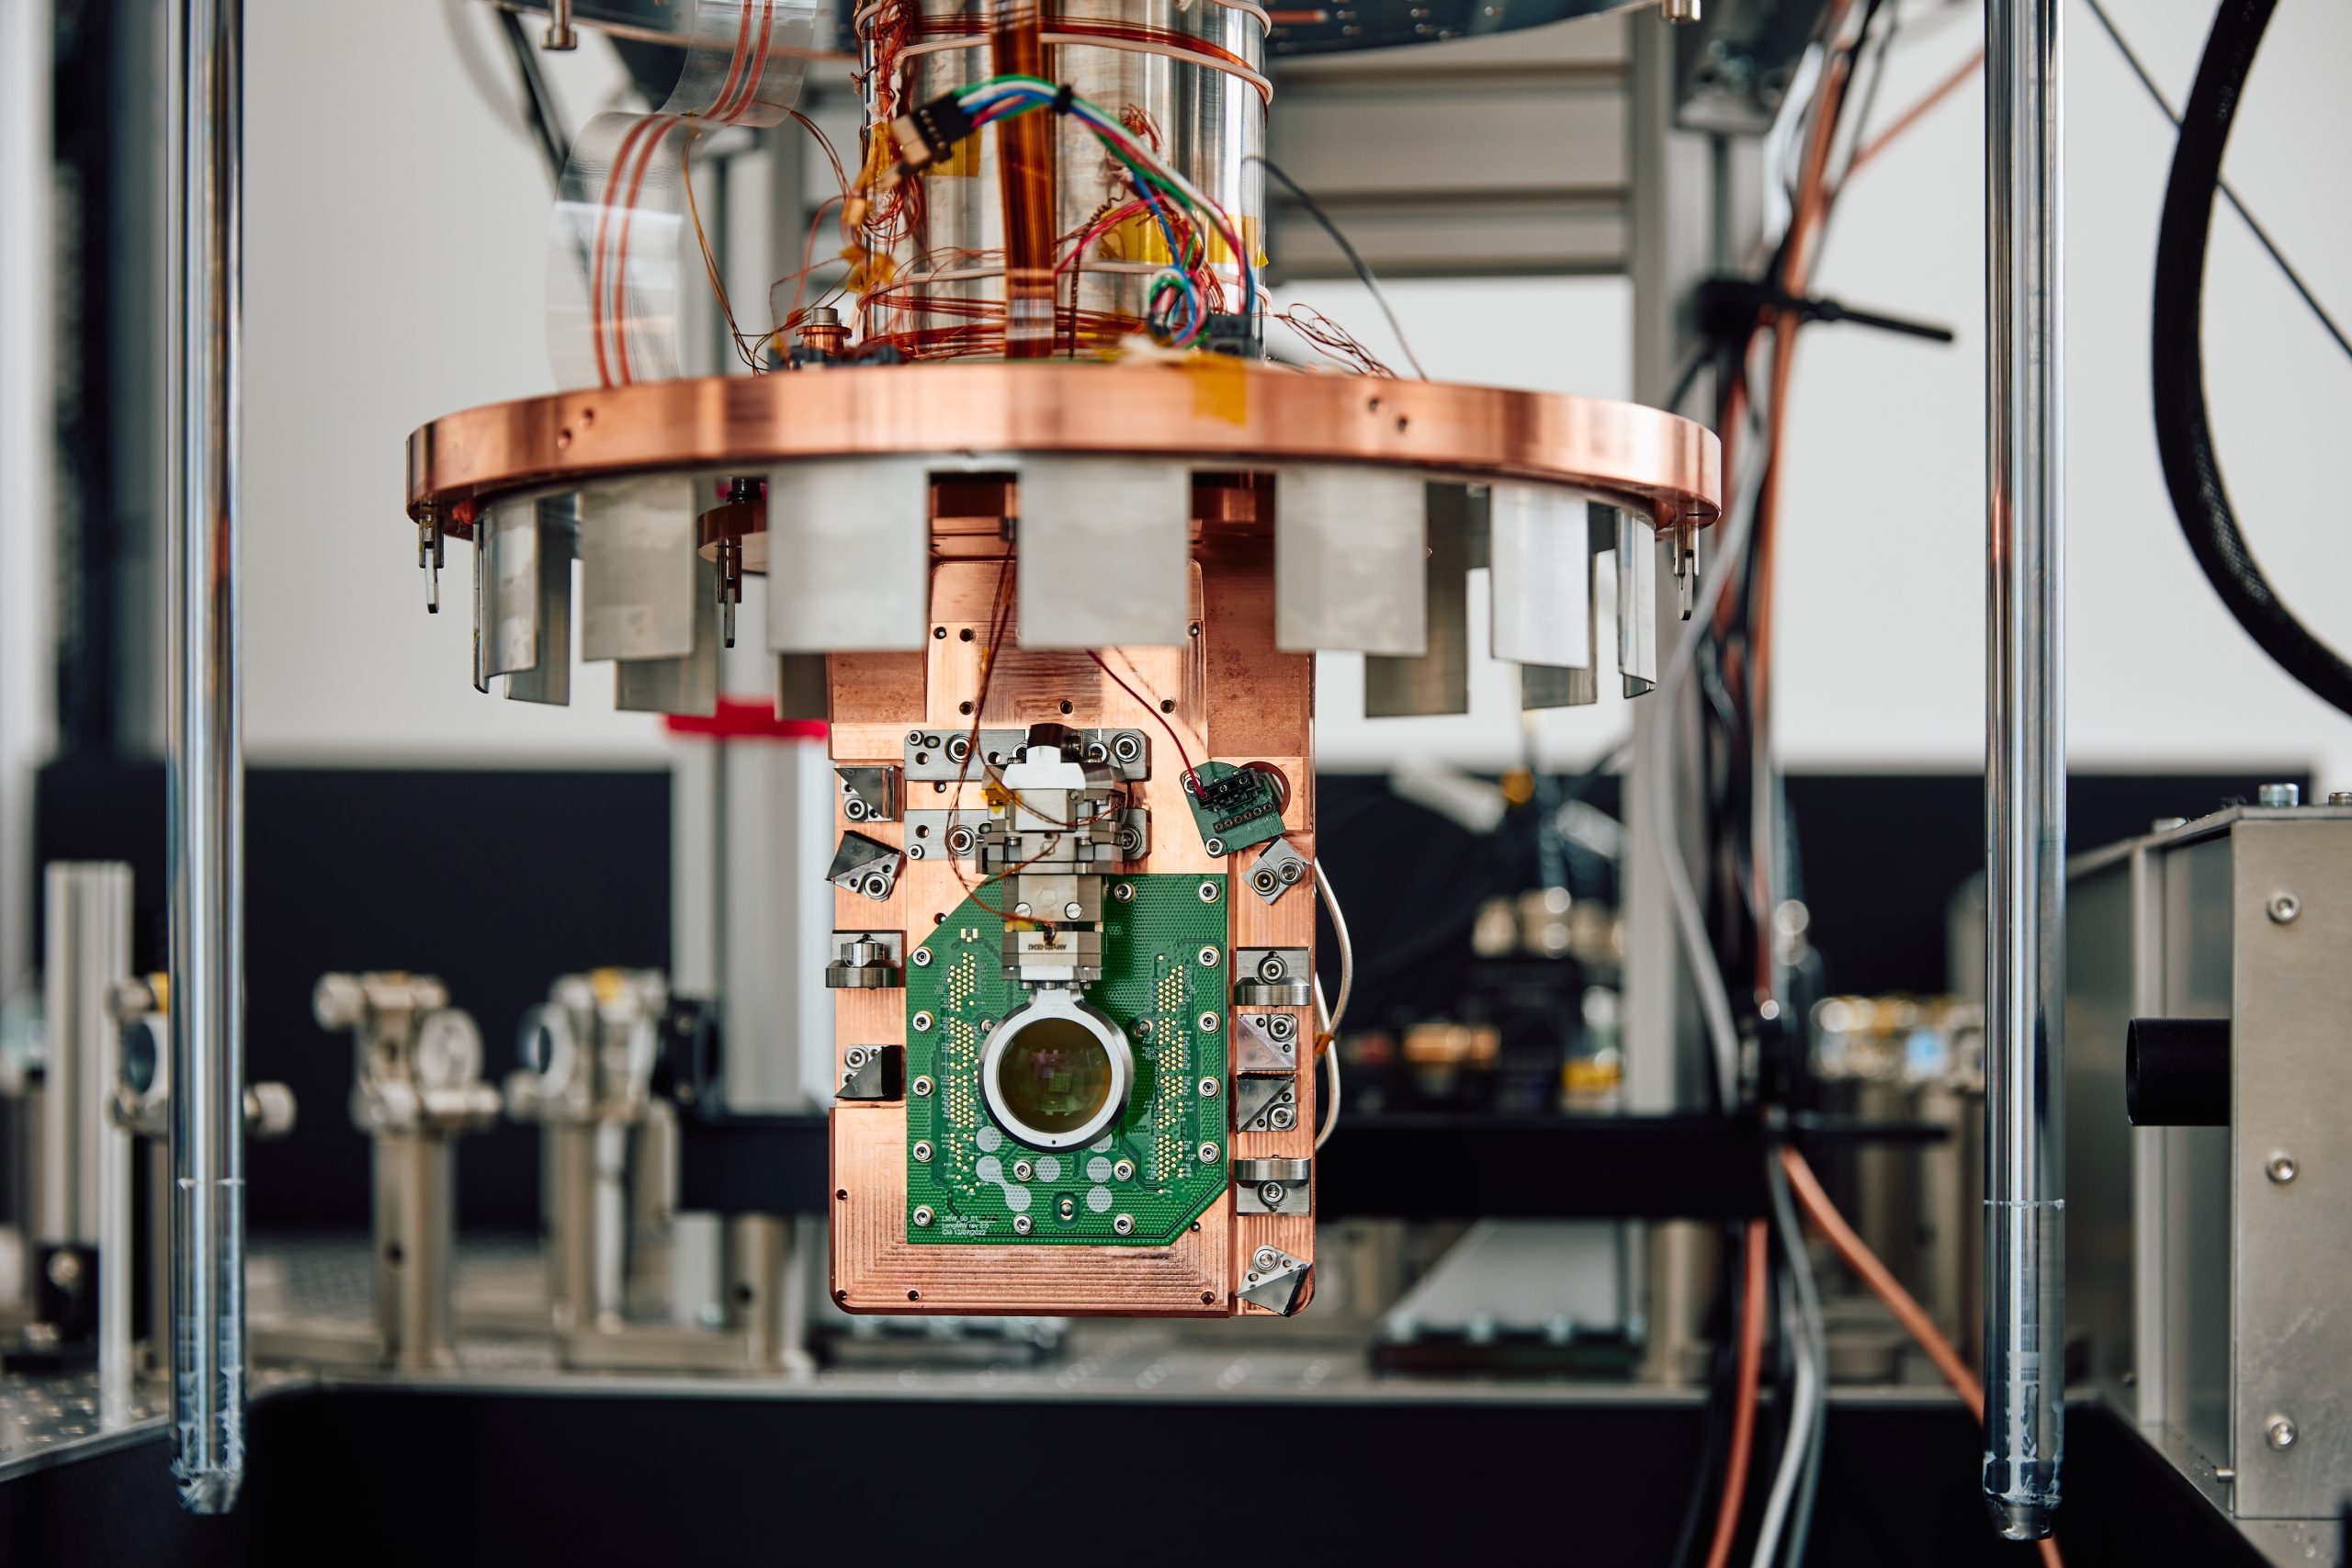 Oxford Ionics Raises £30 Million To Further Trapped Ion Quantum Computing With Backers That Include The Co-Founder Of Arm, Hermann Hauser.